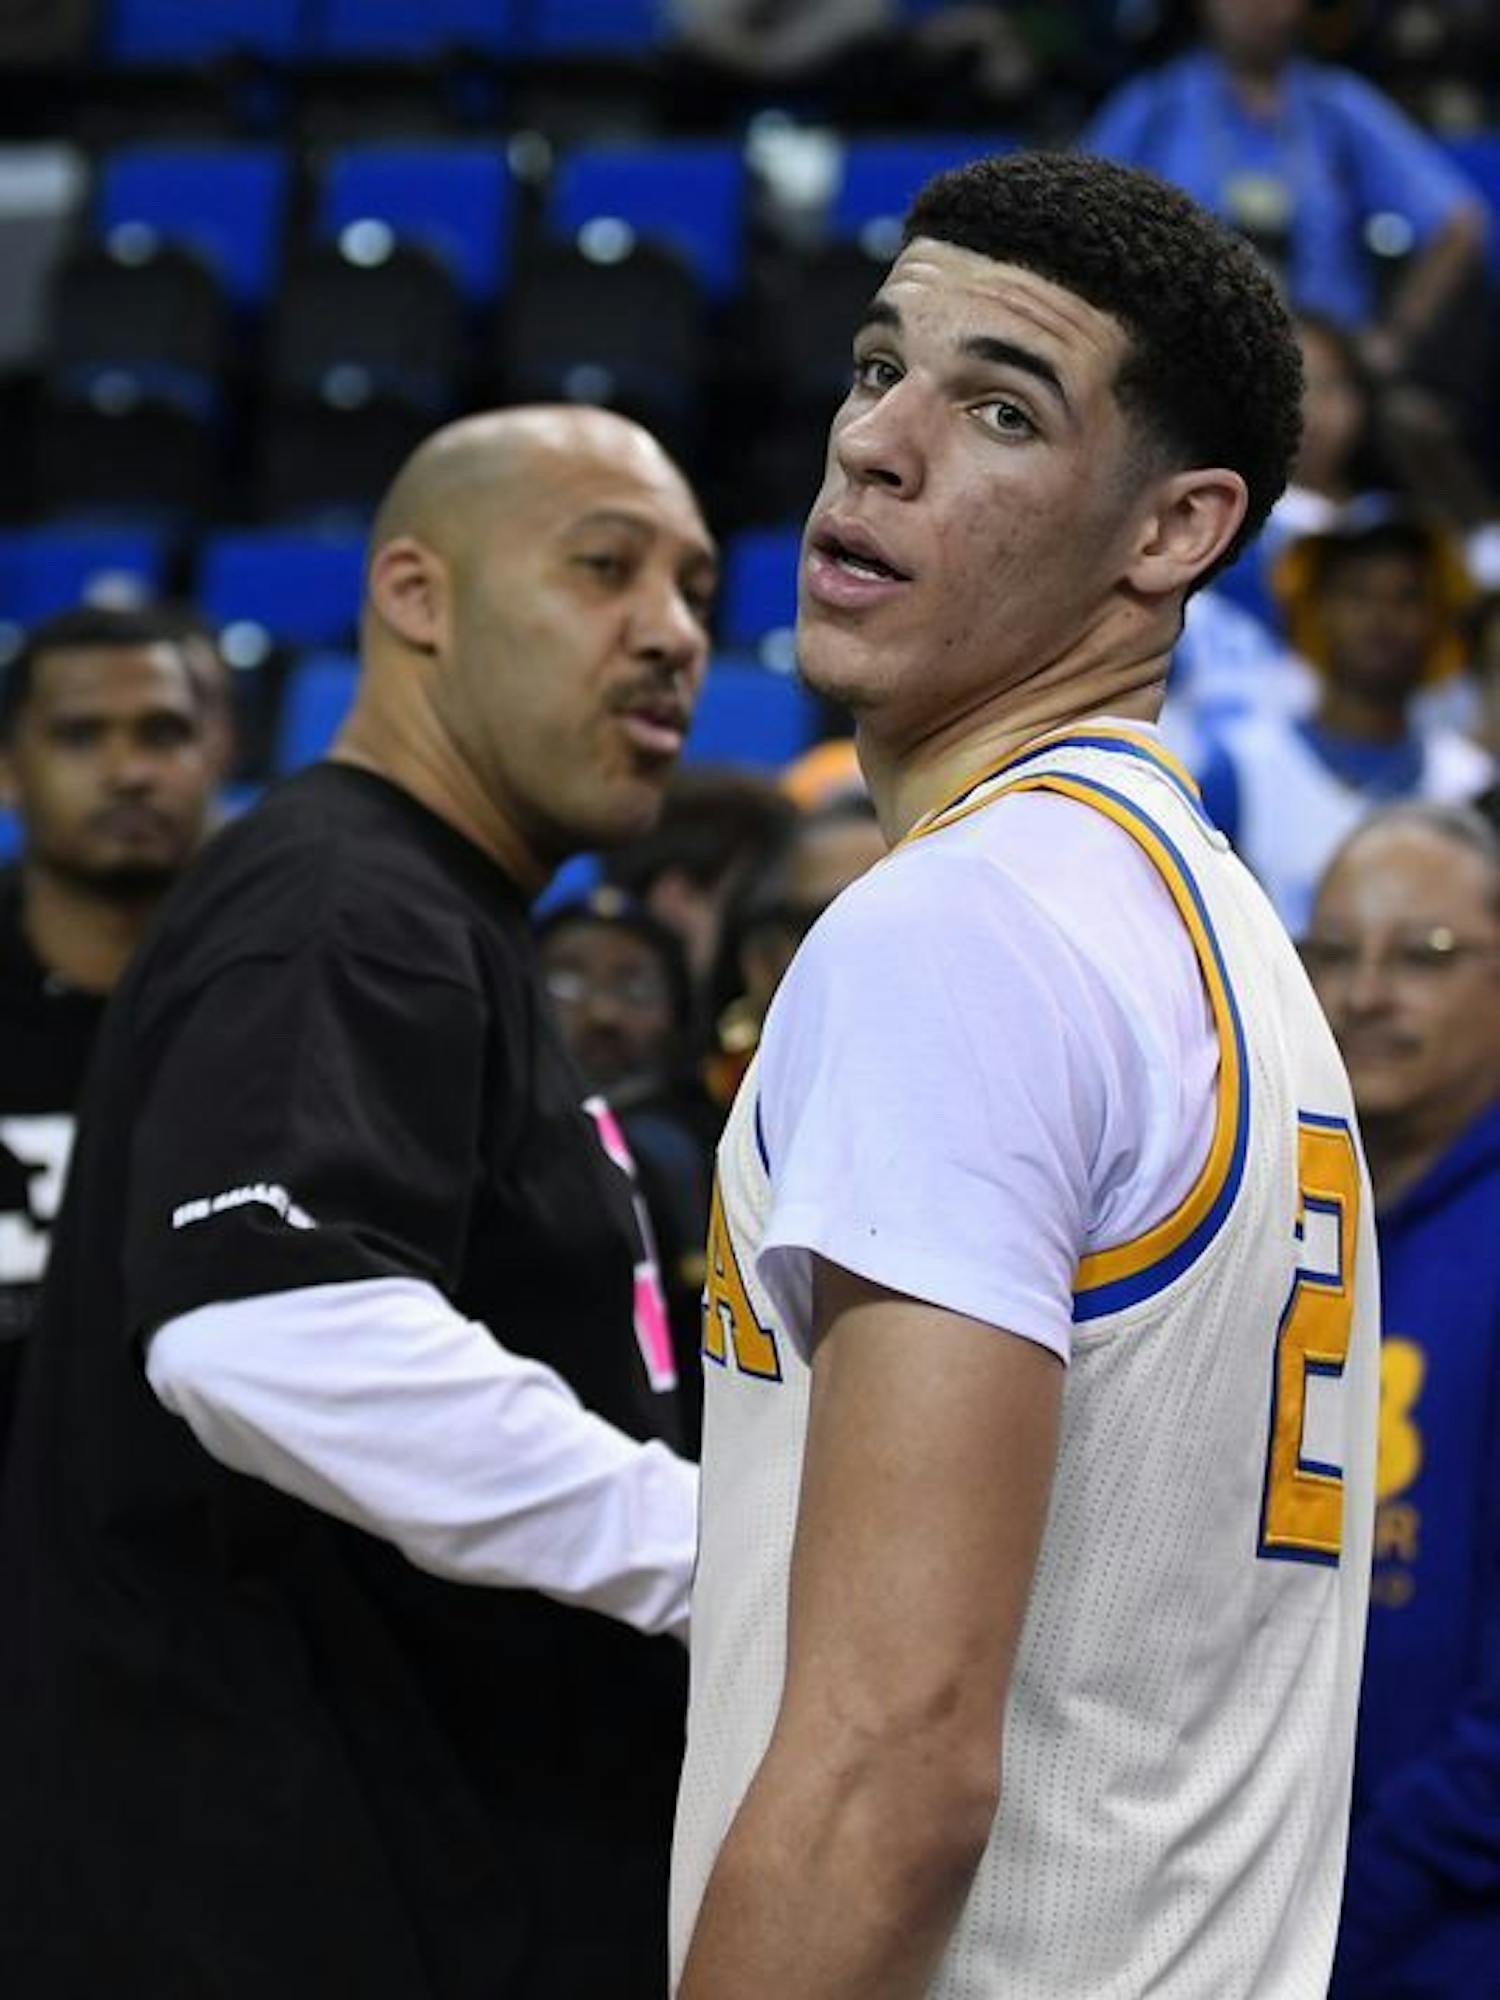 Former UCLA point guard Lonzo Ball (right) and his father, LaVar, shake hands after a game during the 2016-17 college basketball season.